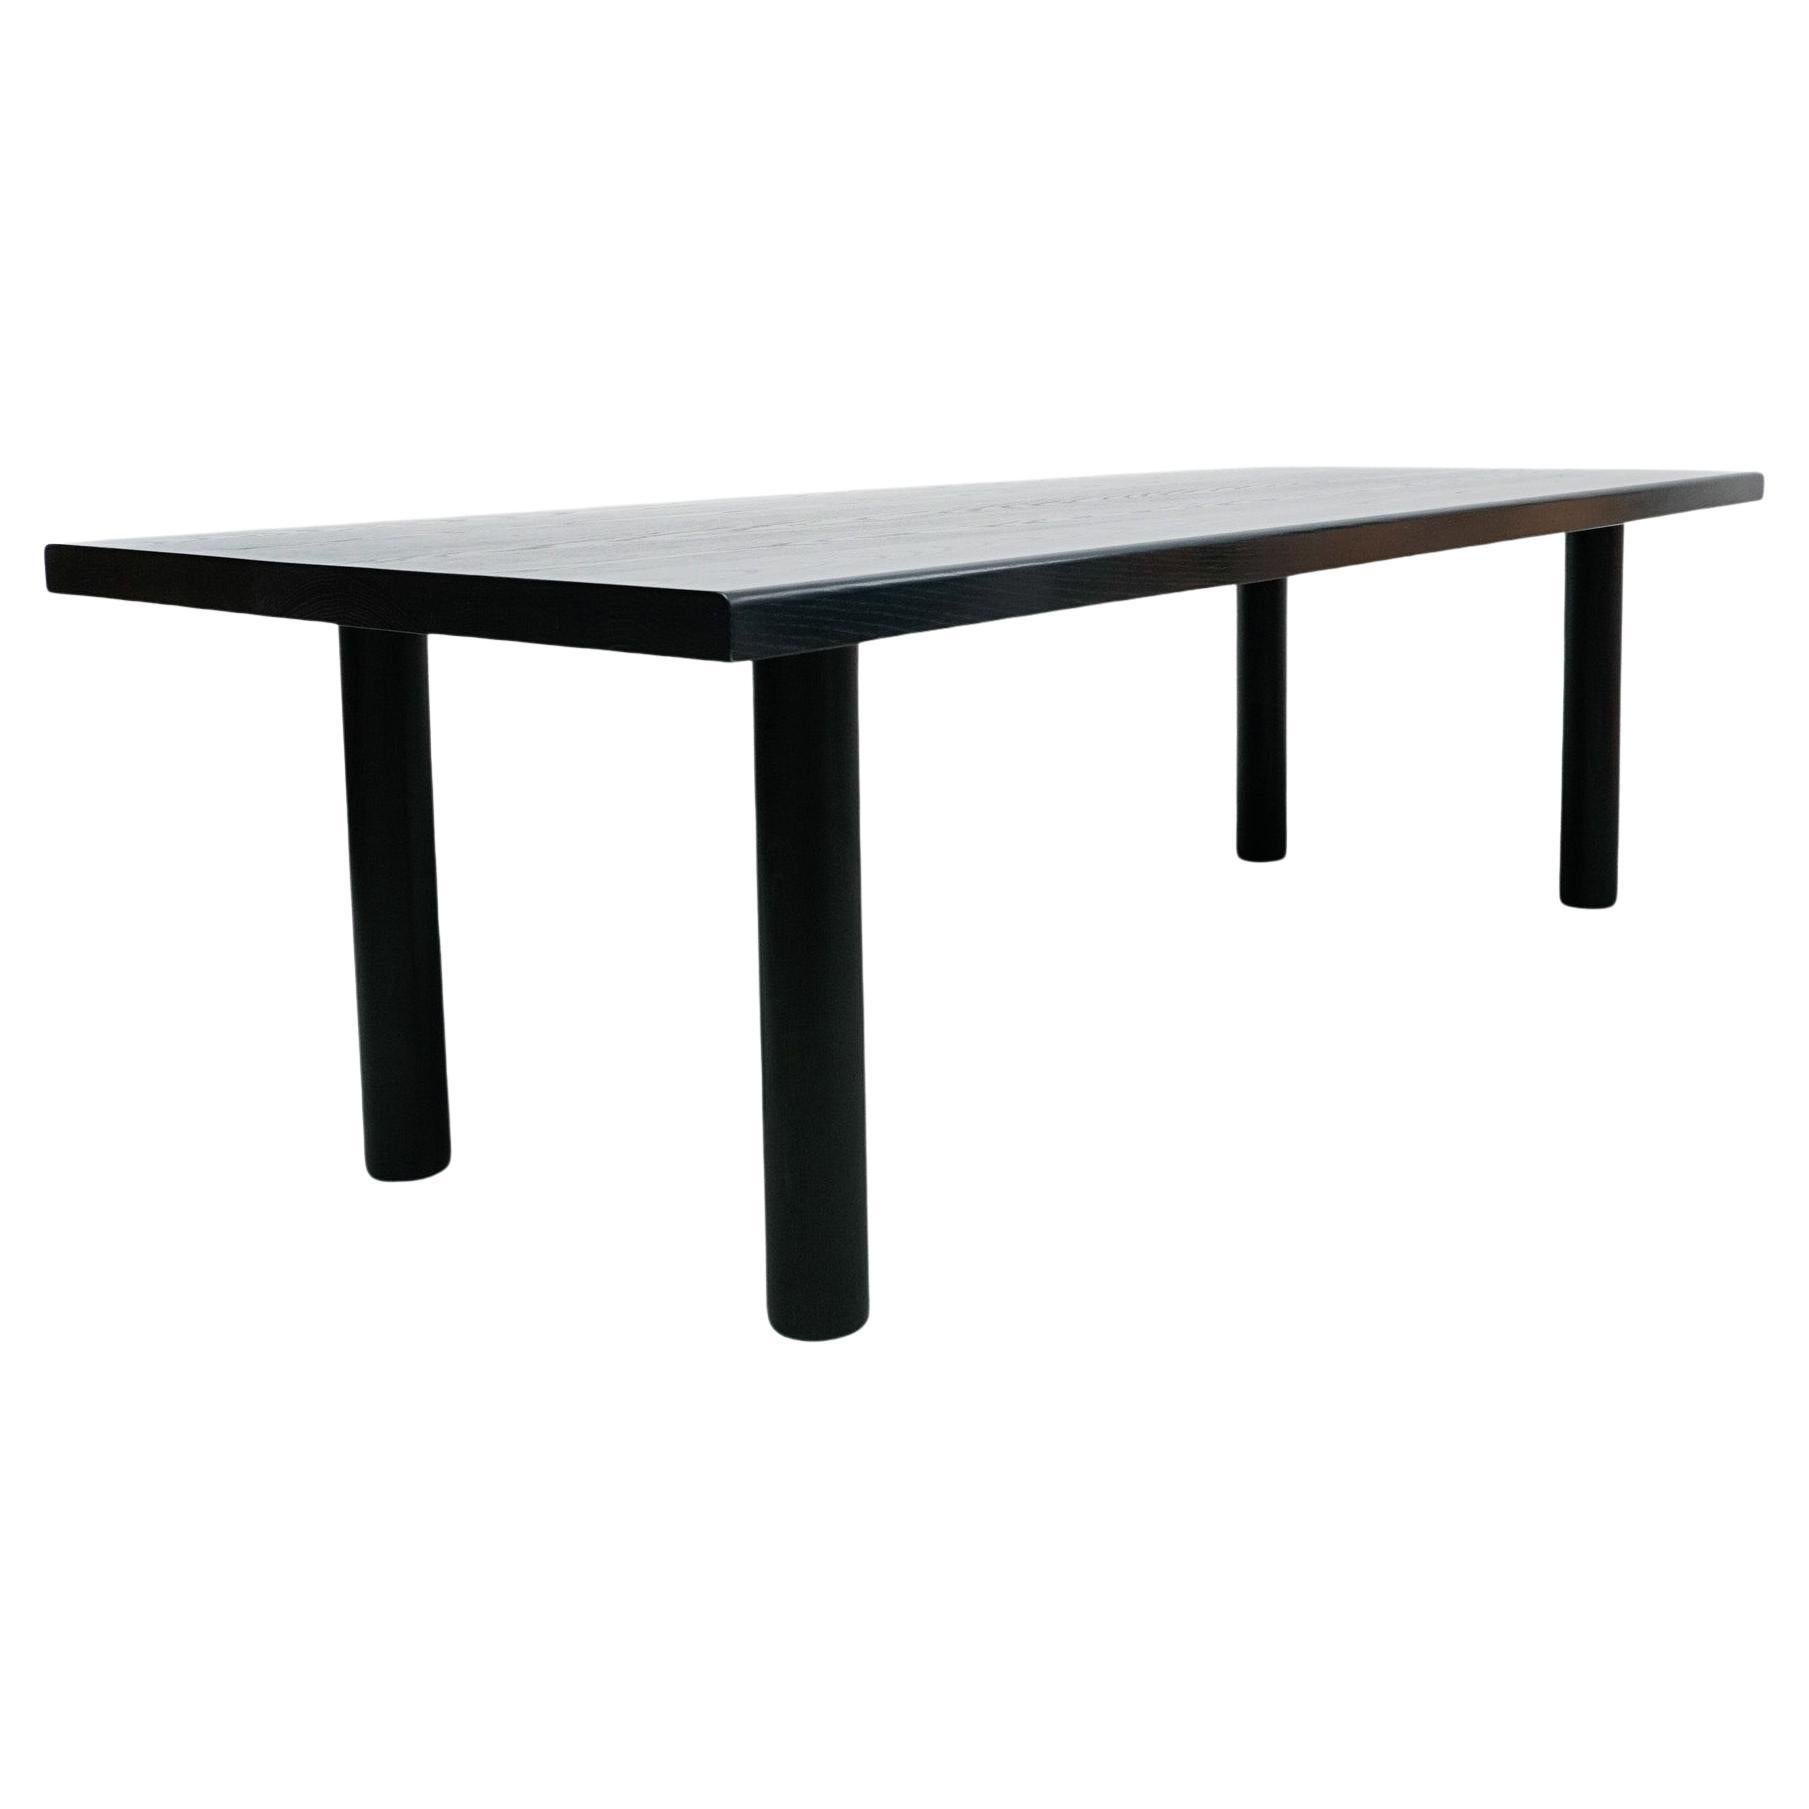 Large dining table by Dada est. manufactured in Barcelona.

Solid ash lacquered black.

Measures: 106 cm D x 260 cm W x 76 cm H 

There is the possibility of making it in different measures and woods.

Dada Est. Makes a handmade furniture production